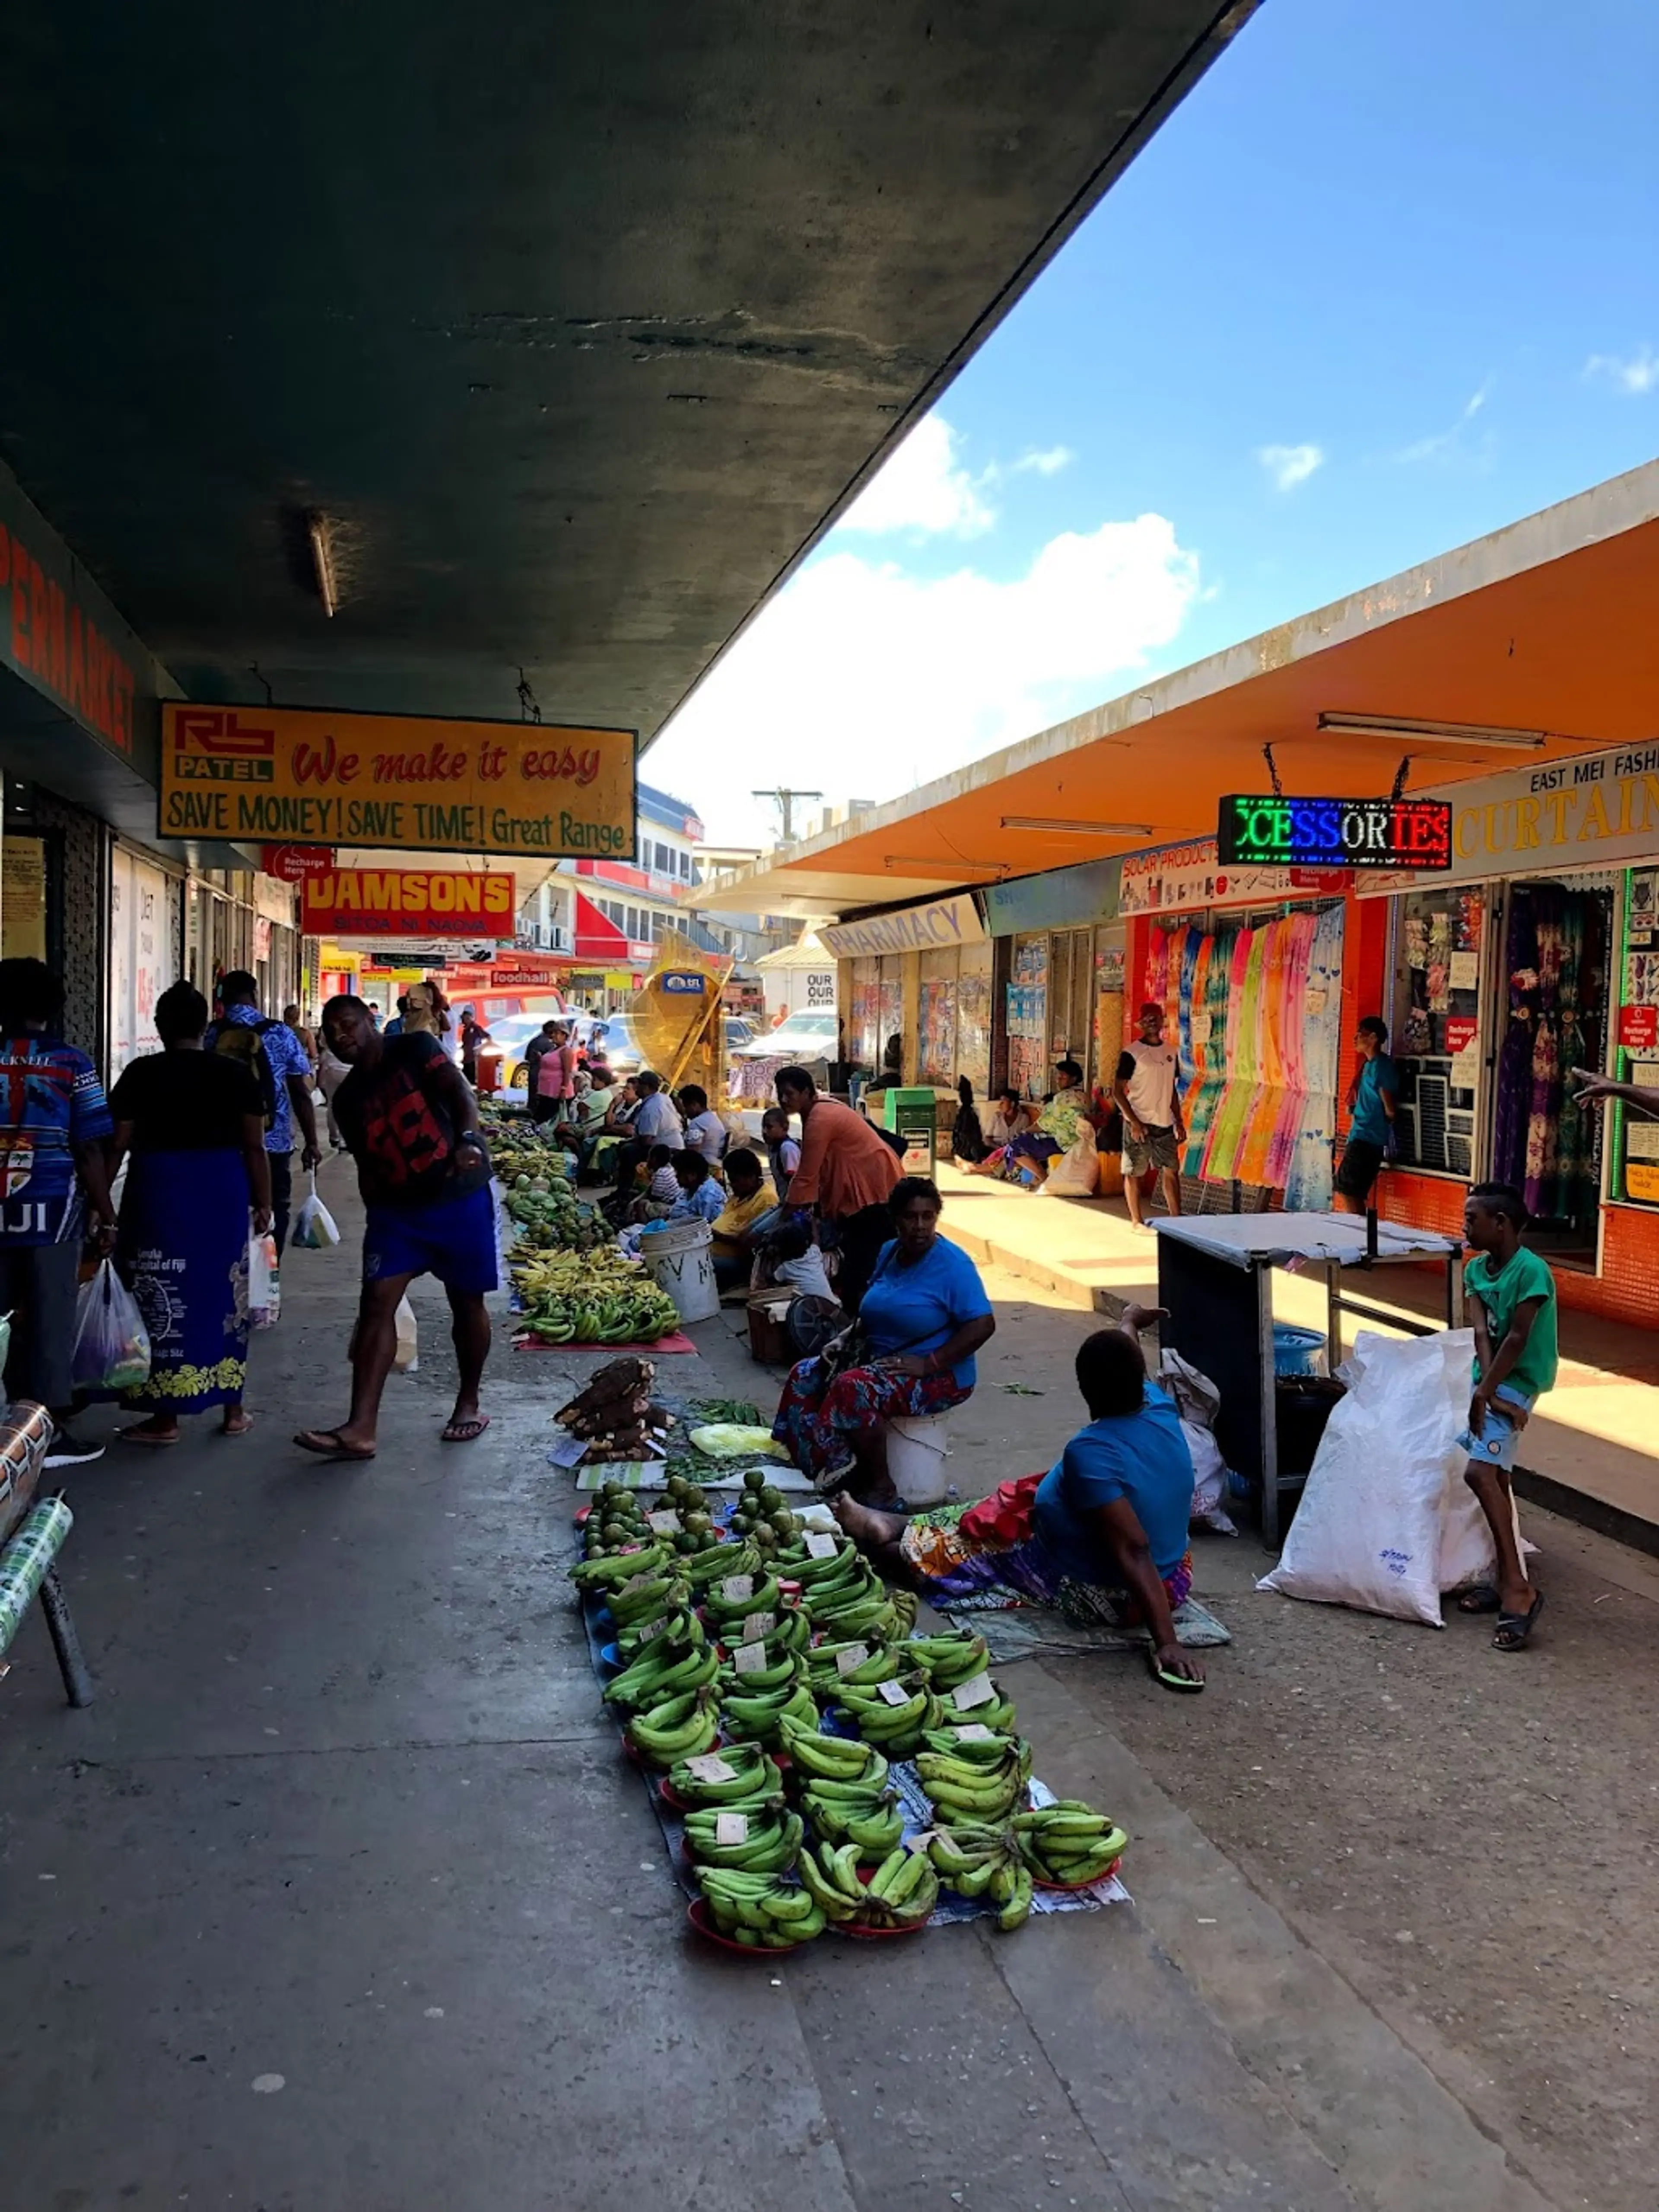 Local Shops and Markets in Sigatoka